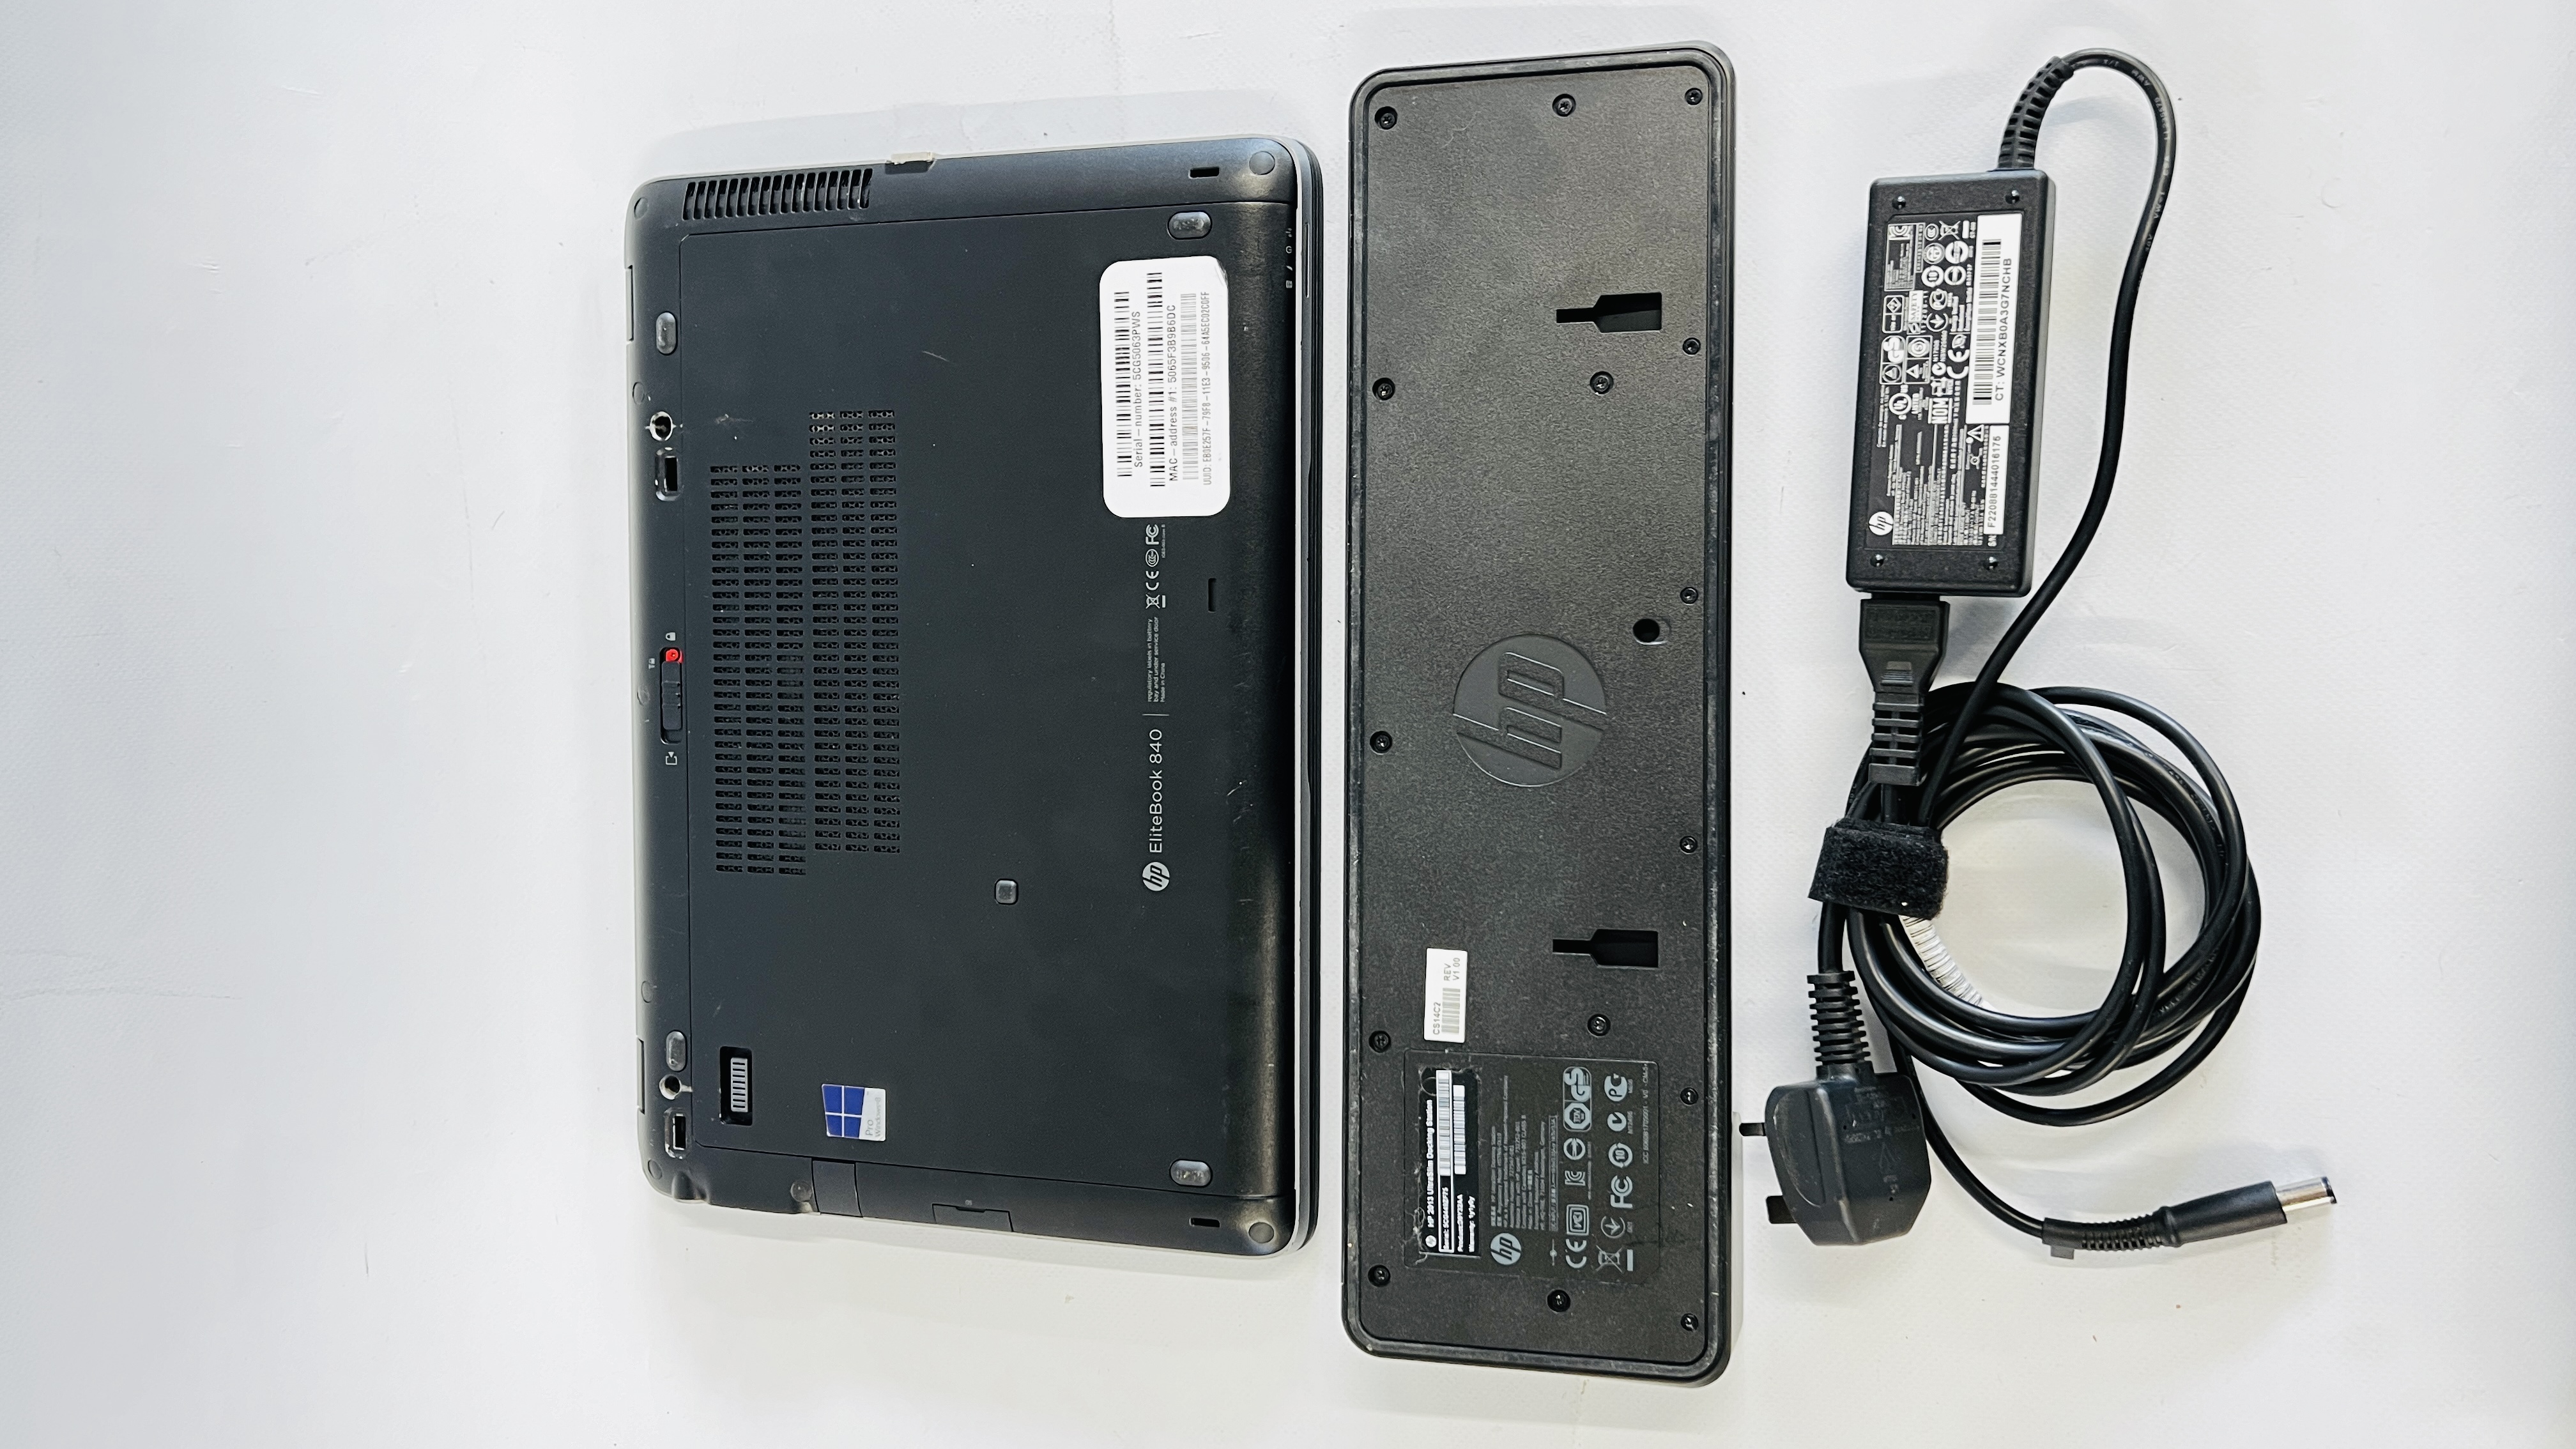 HP ELITEBOOK 840 LAPTOP CORE i5 COMPLETE WITH CHARGER & HP ULTRASLIM DOCKING STATION - NO OPERATING - Image 3 of 3